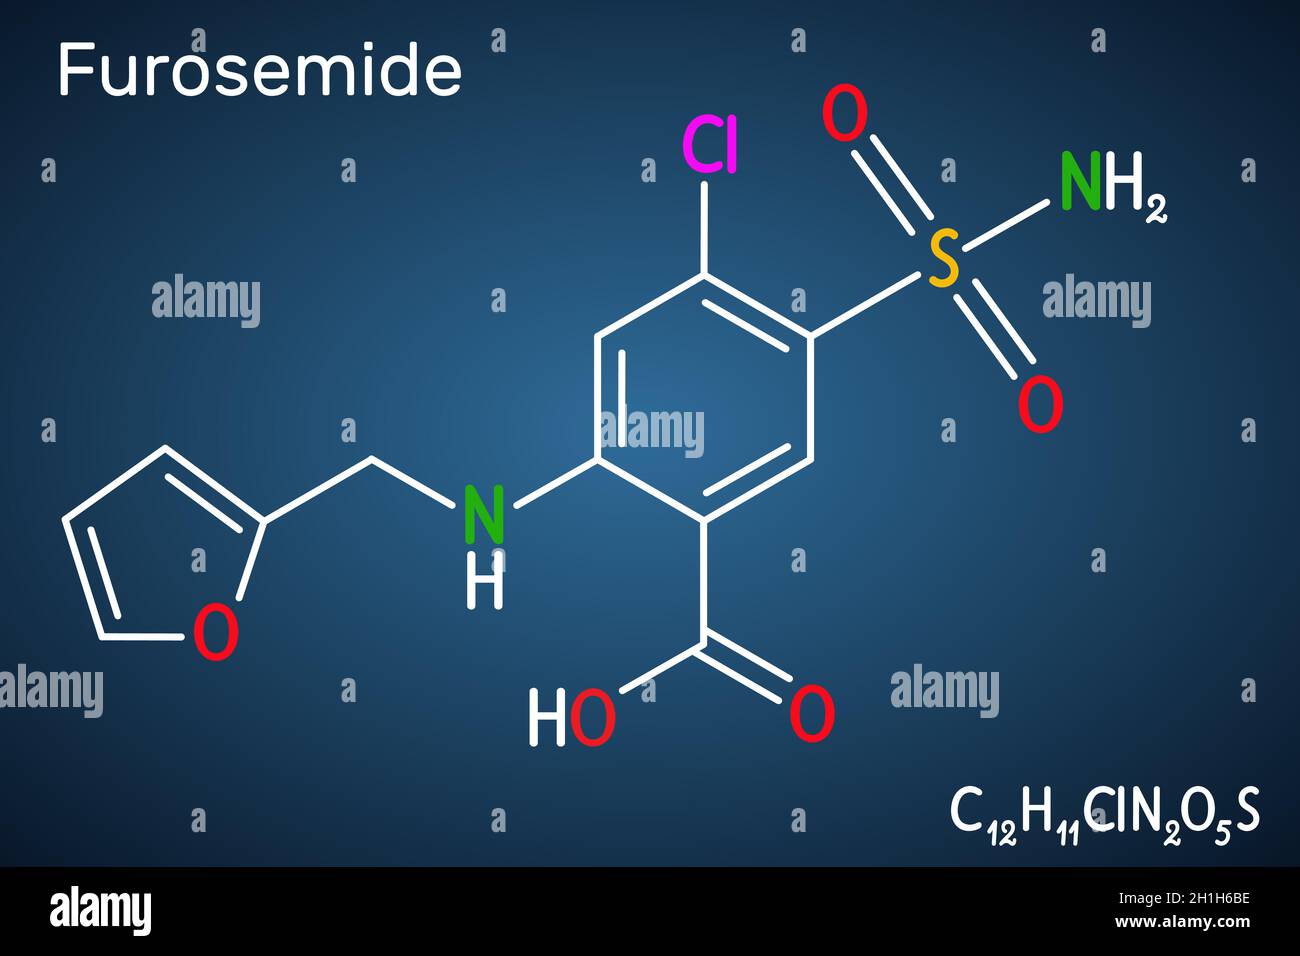 Furosemide, Frusemide molecule. Diuretic drug, is used to treat hypertension and edema. Structural chemical formula on the dark blue background. Vecto Stock Vector